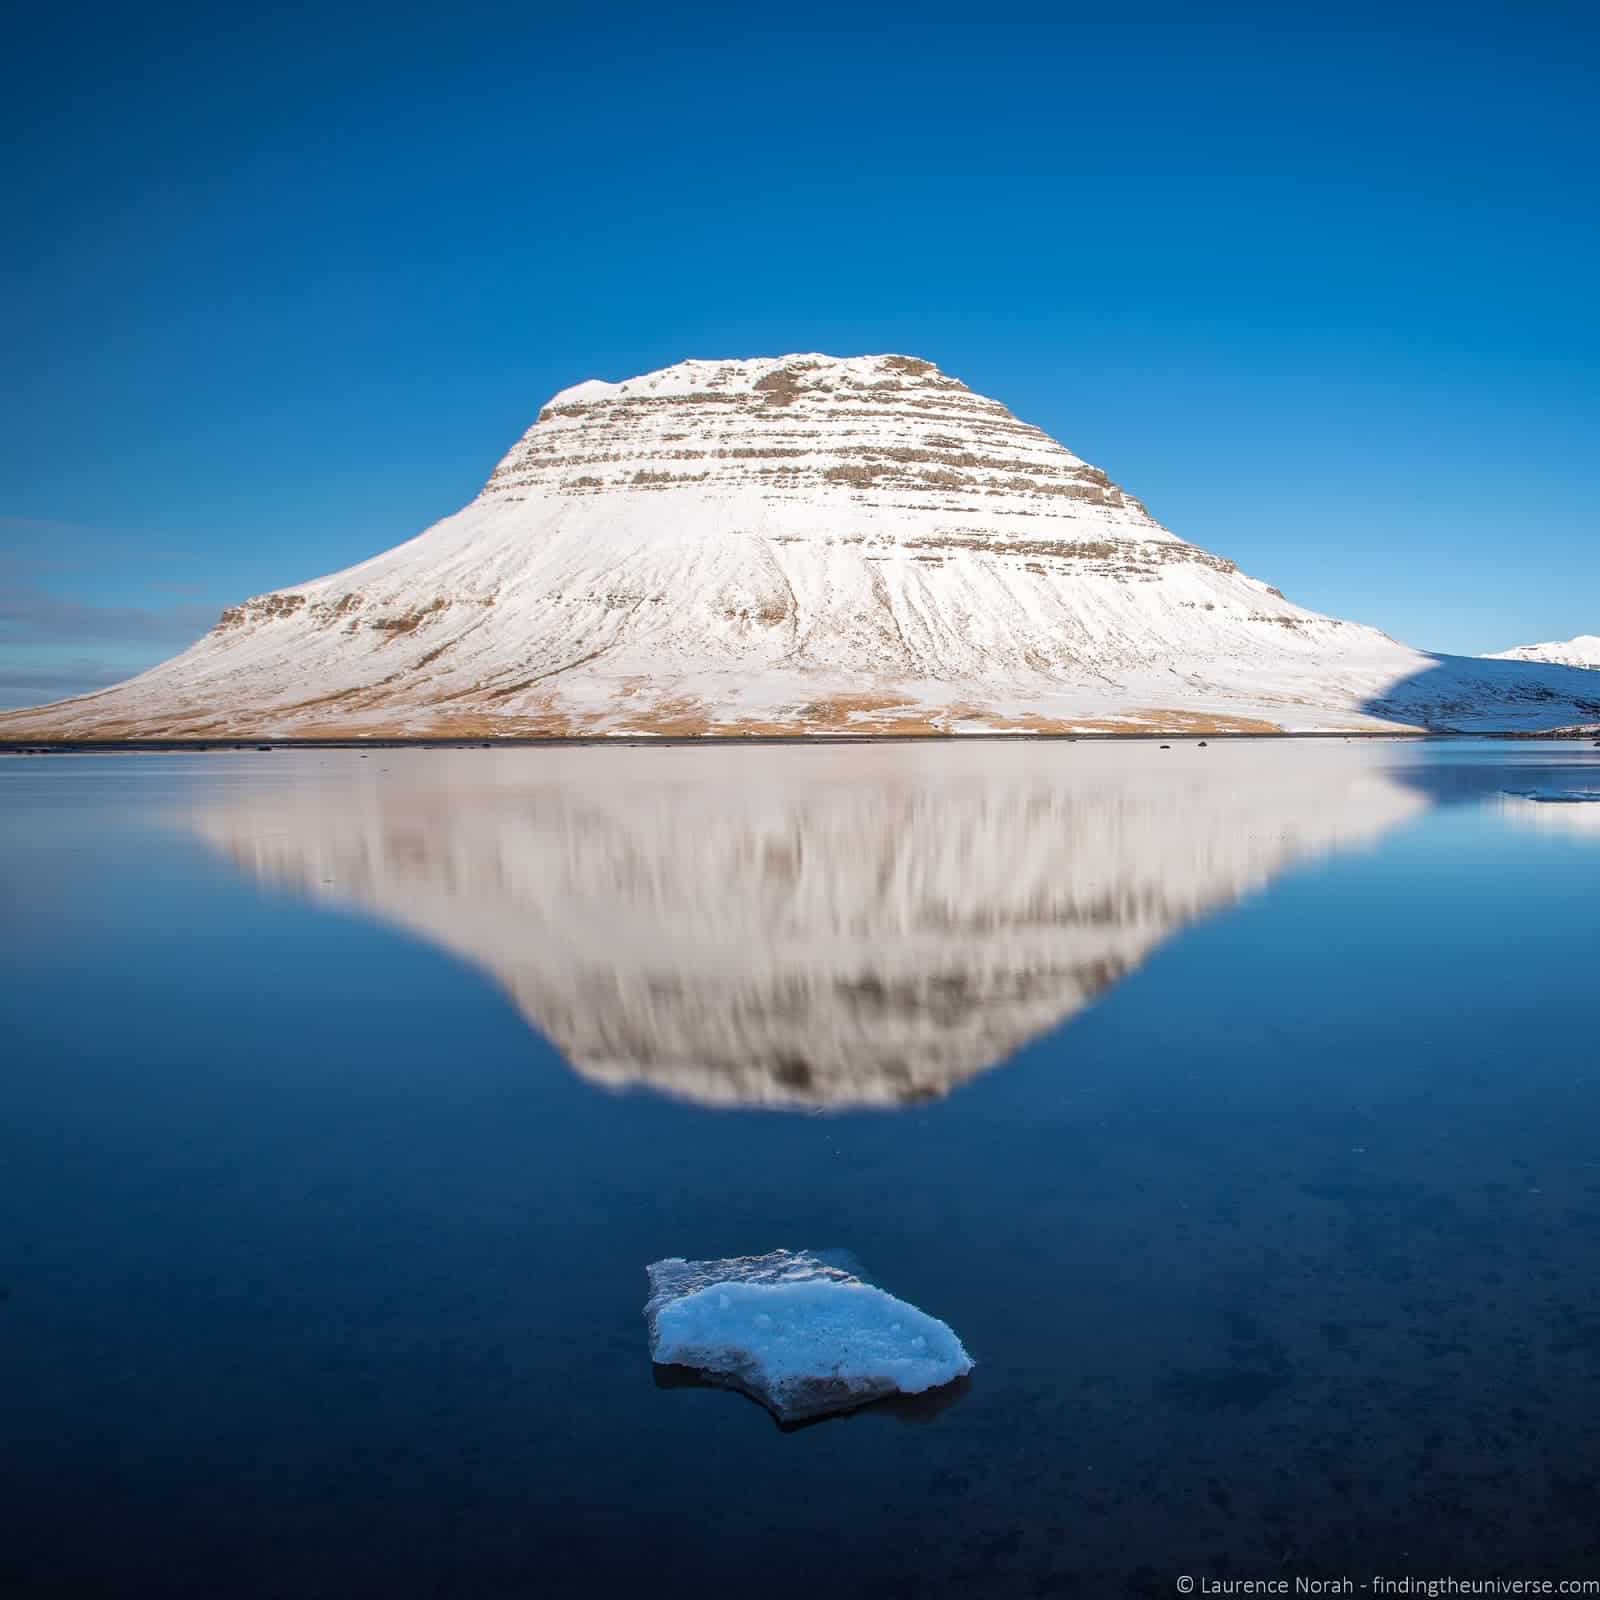 Kirkjufell in Iceland, with reflection in the icy lake at its base.